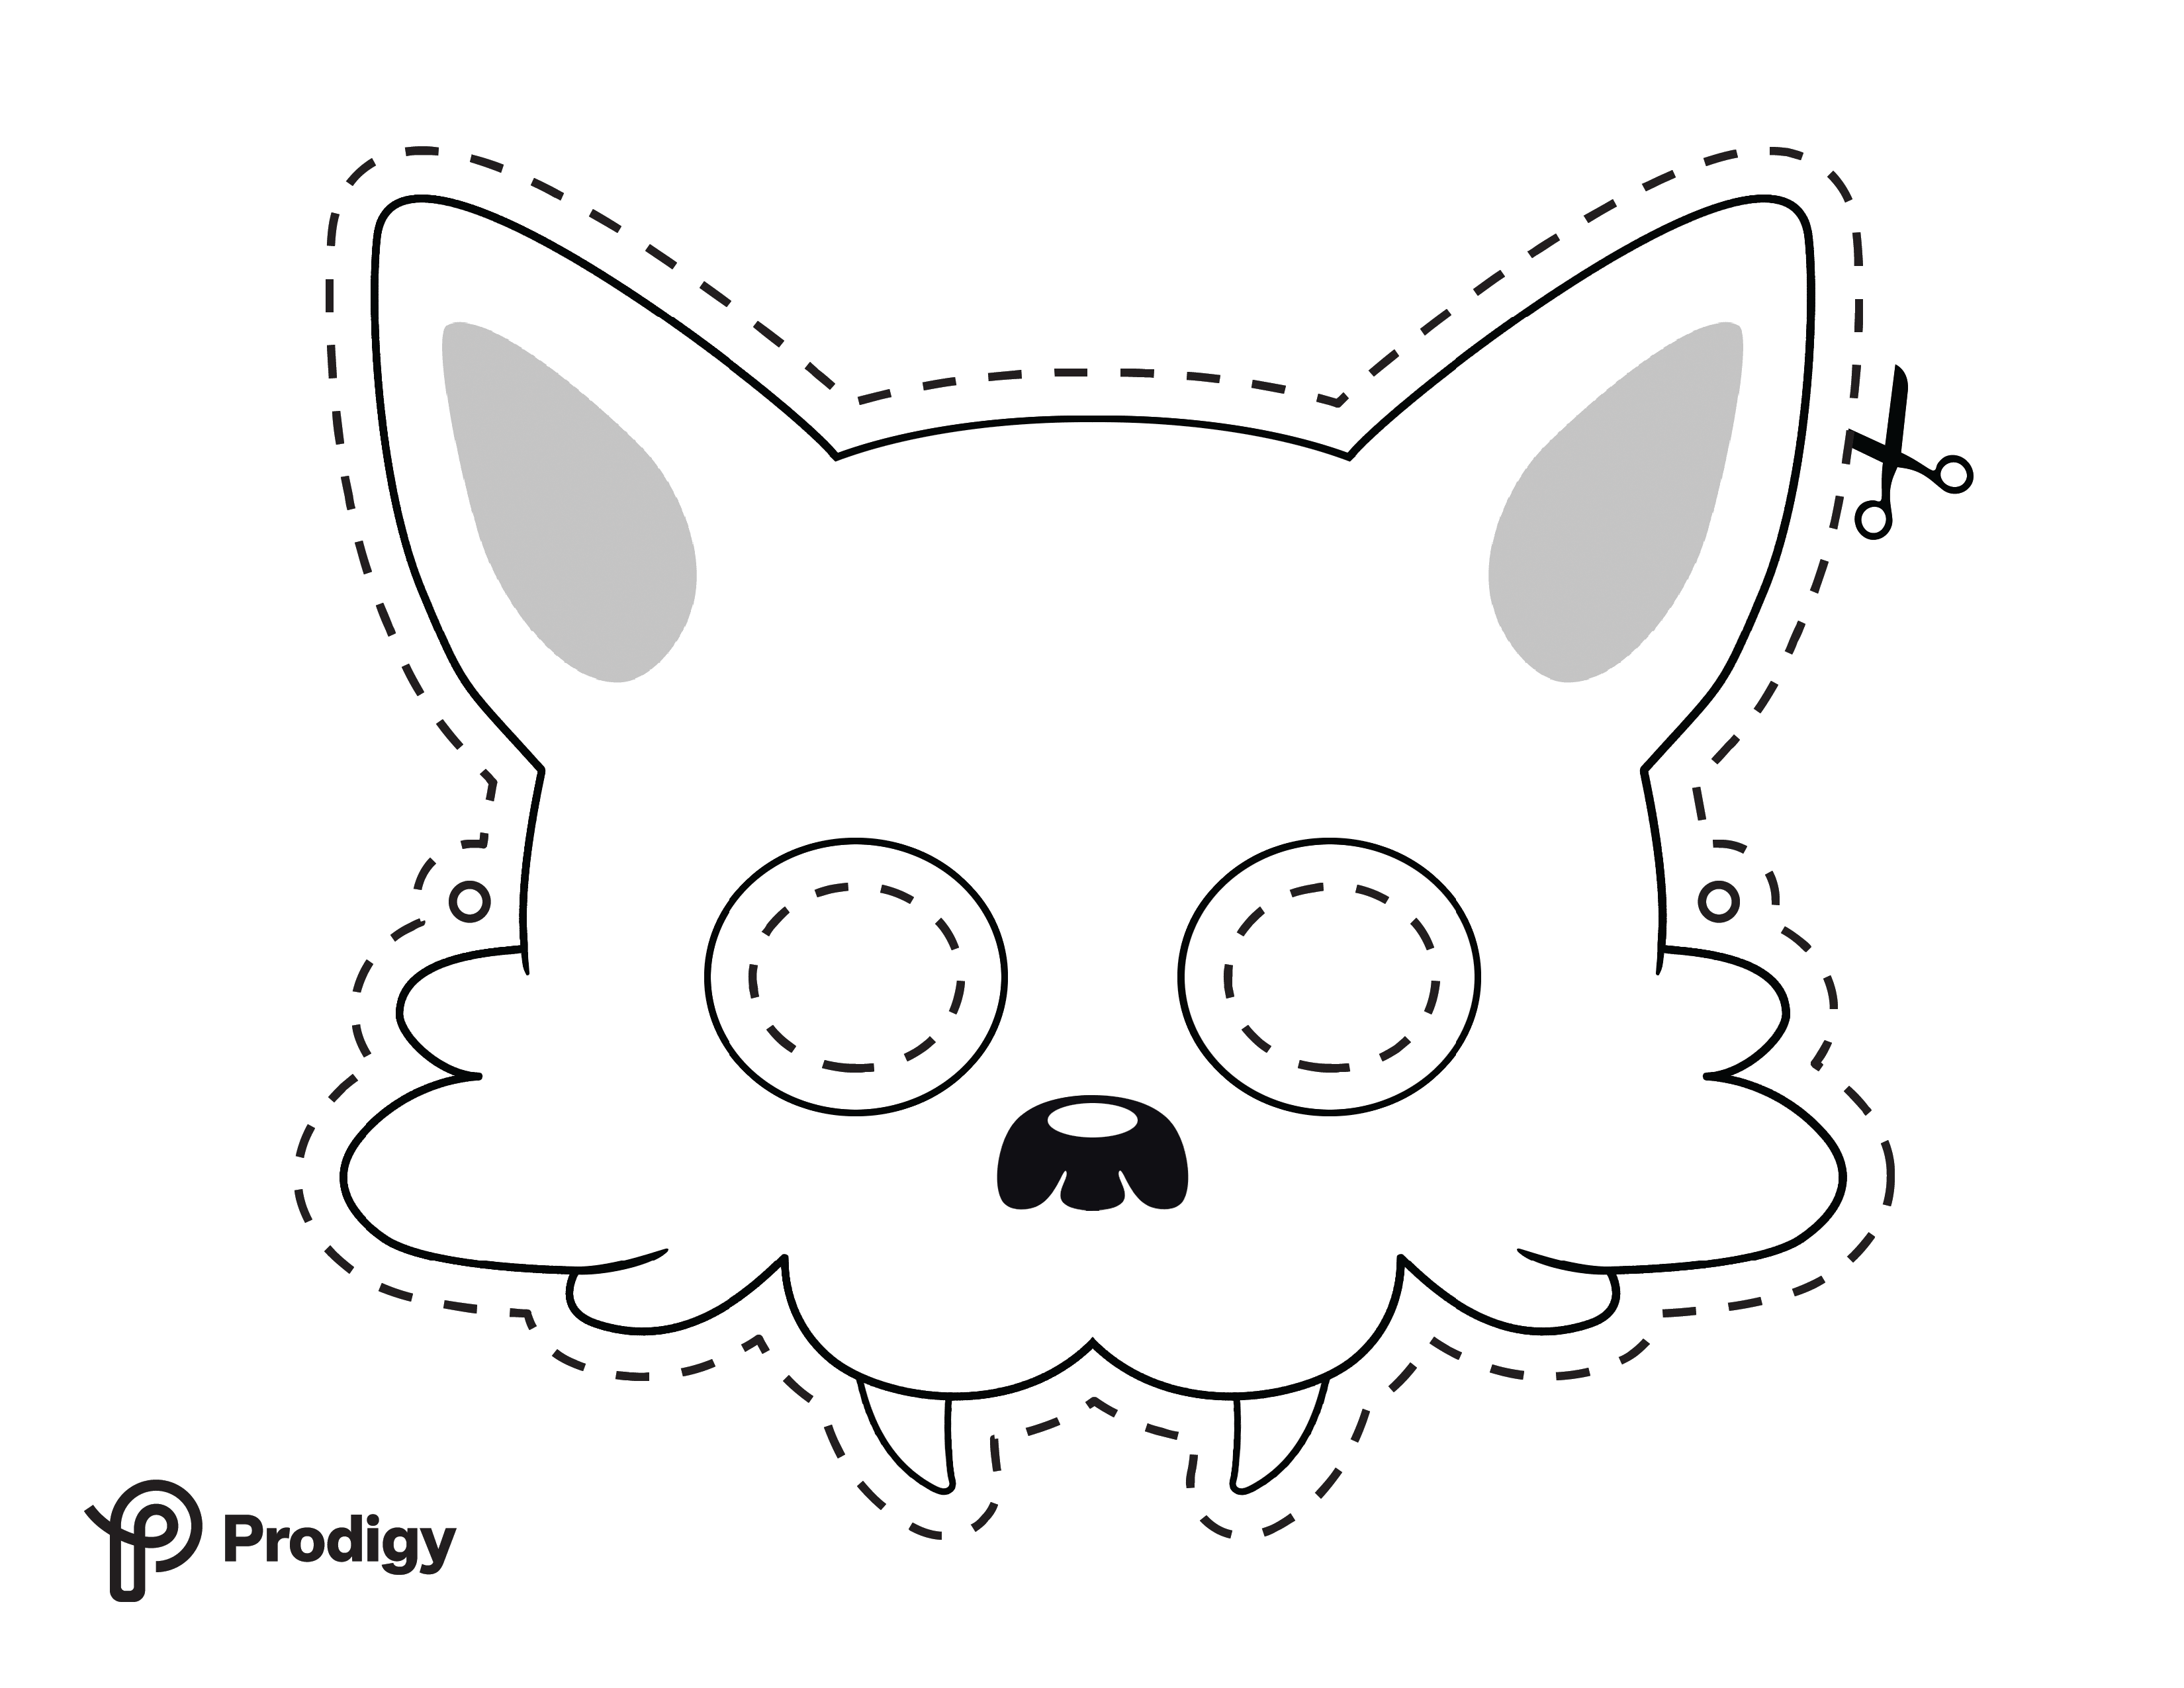 Printable Prodigy werewolf mask in black and white coloring page